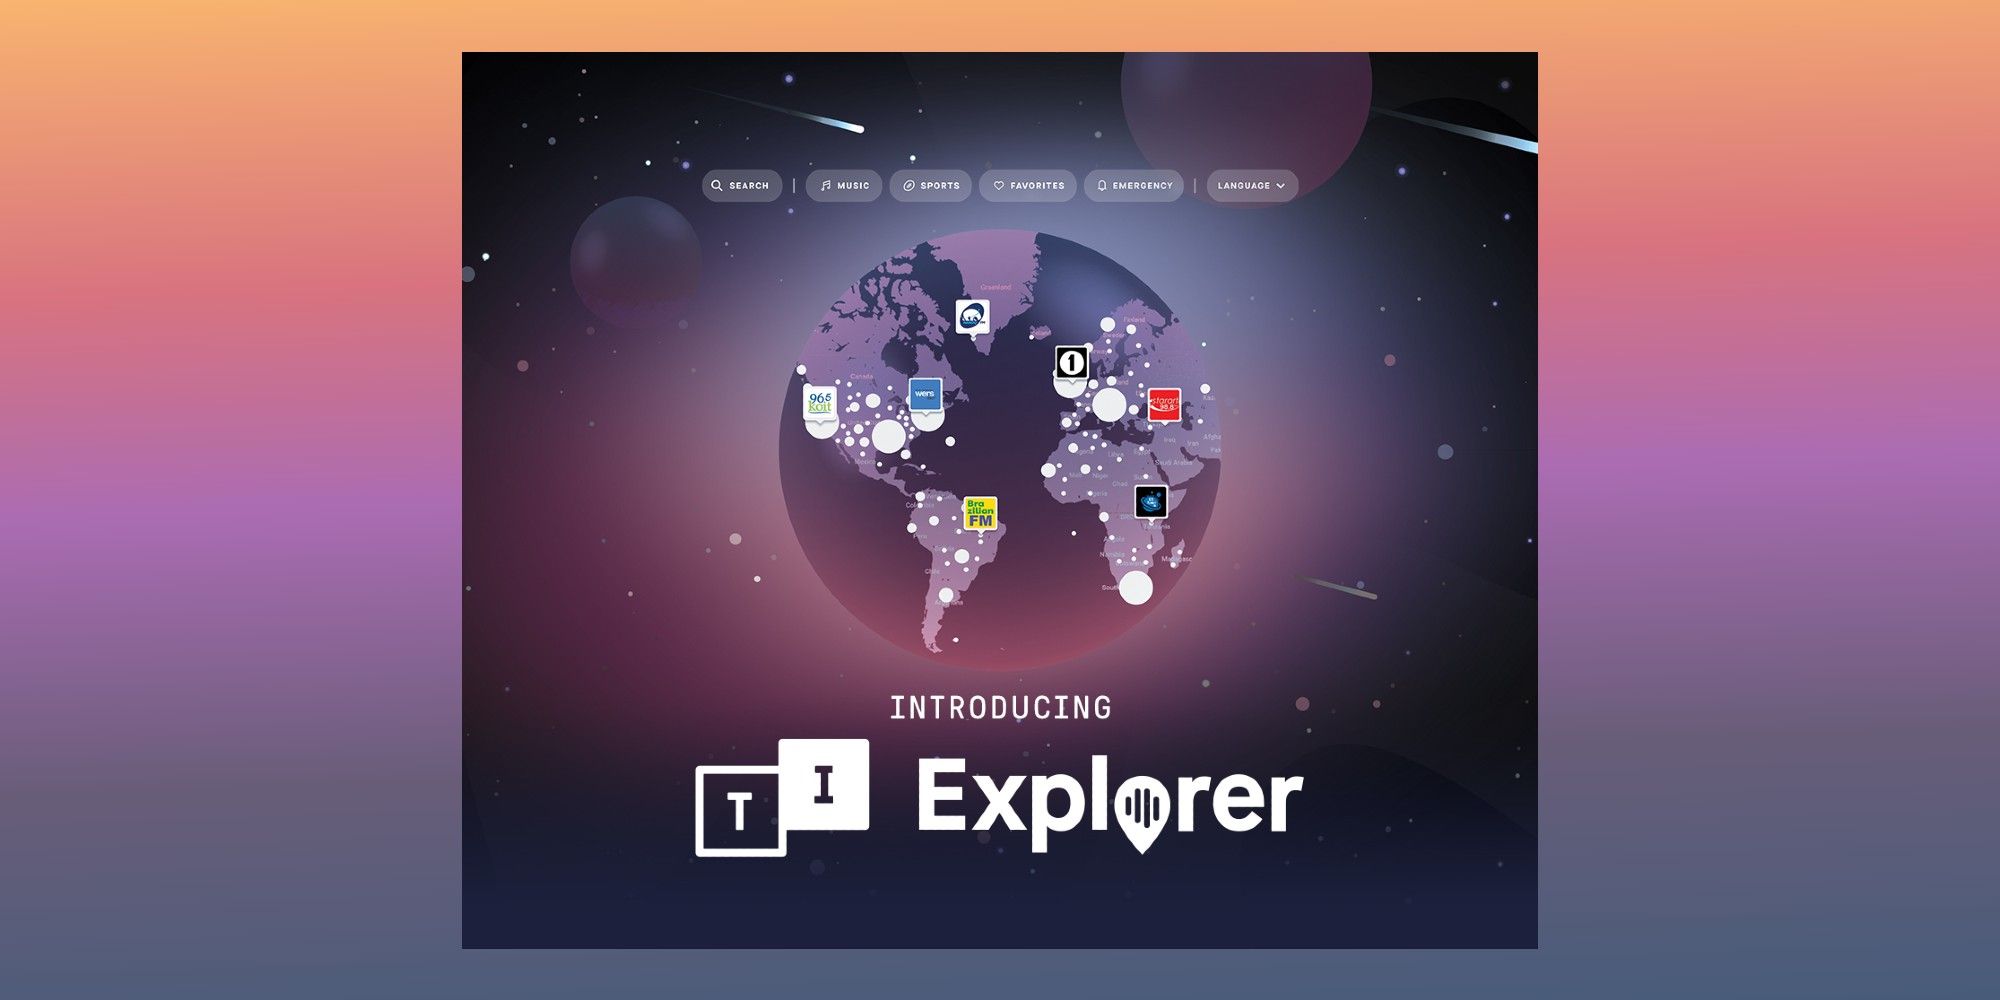 Introduction image of TuneIn Explorer.